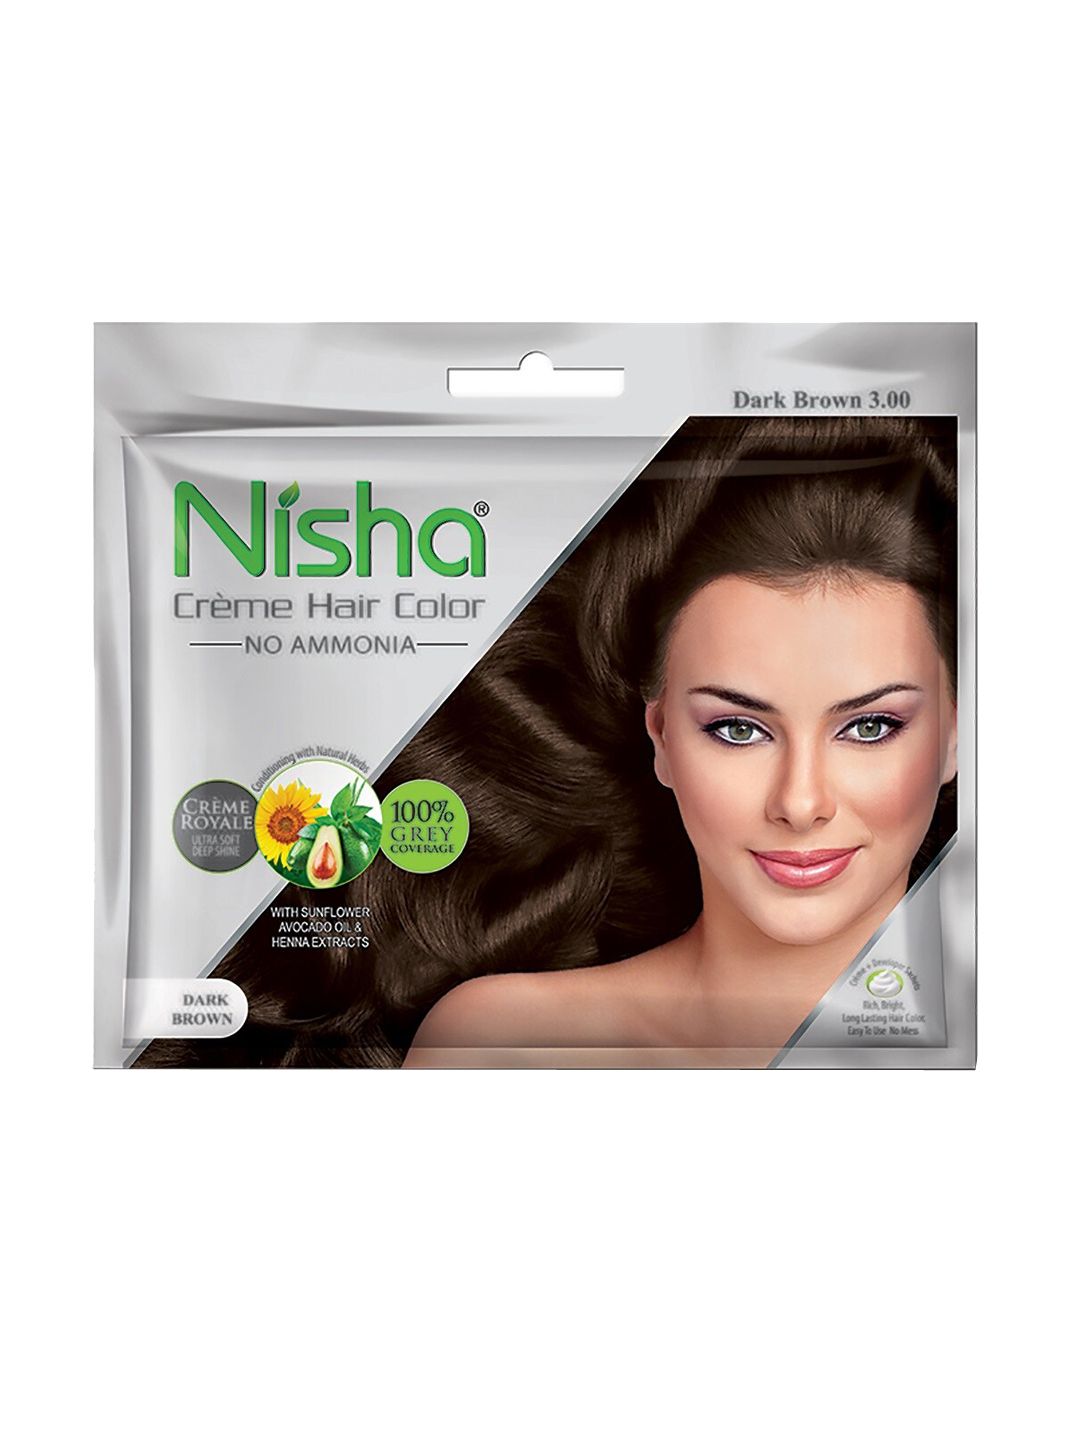 Nisha Pack of 6 Creme Hair Colour 240g - Dark Brown Price in India